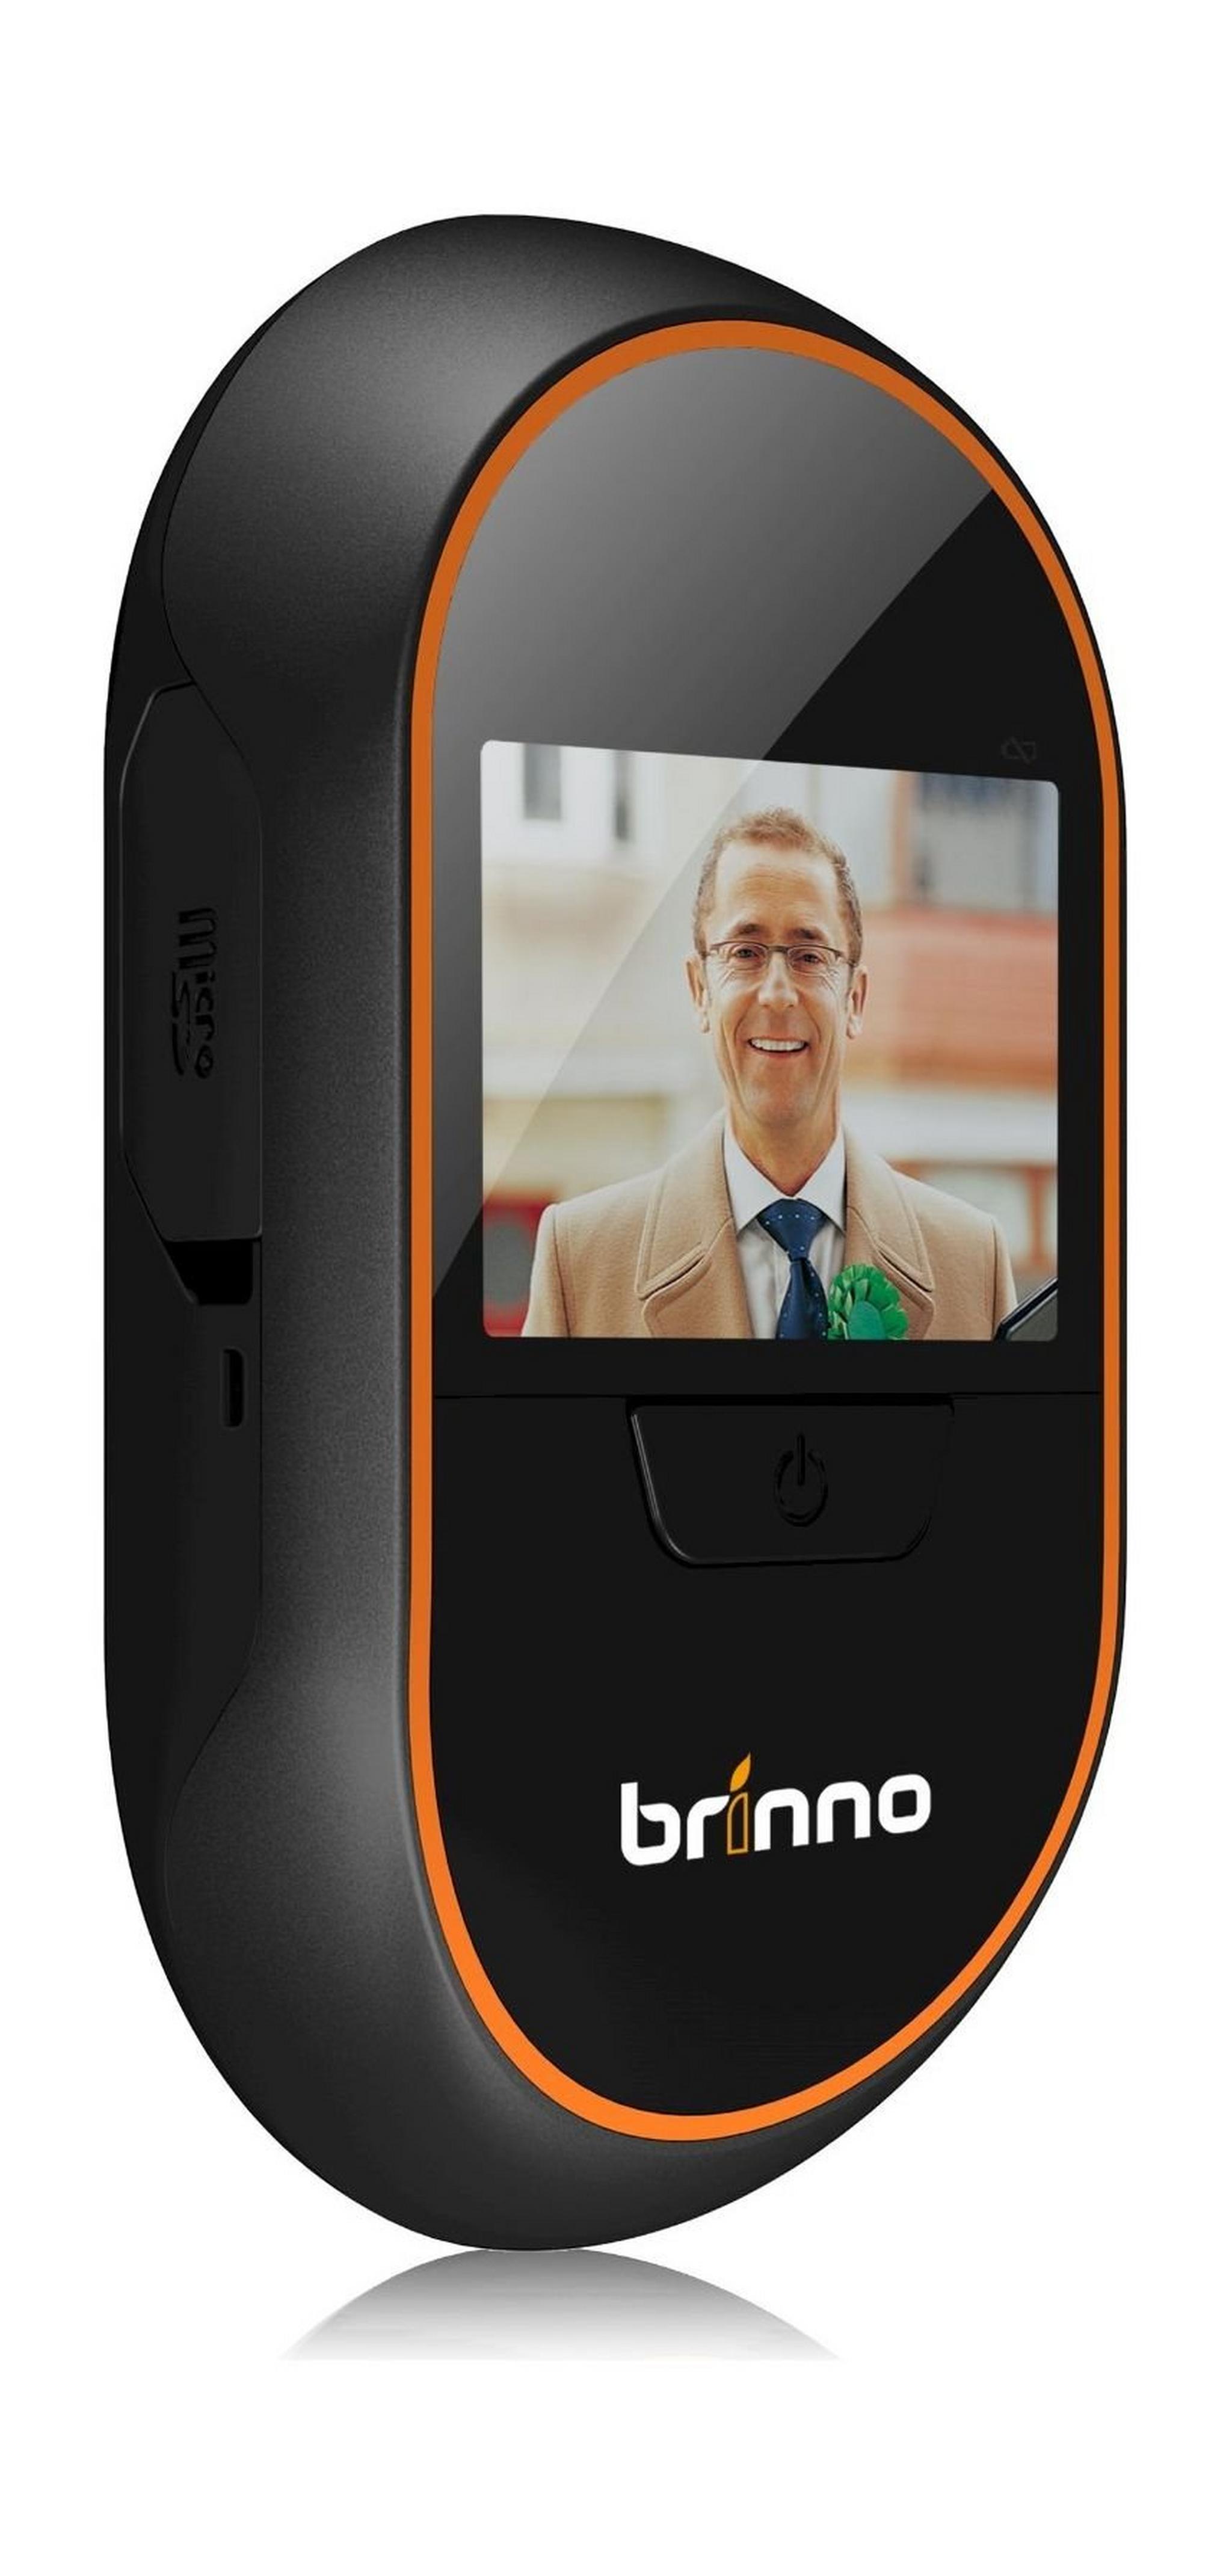 Brinno PHVMAC 1.3MP Motion Activated Peephole Viewer  Security Camera